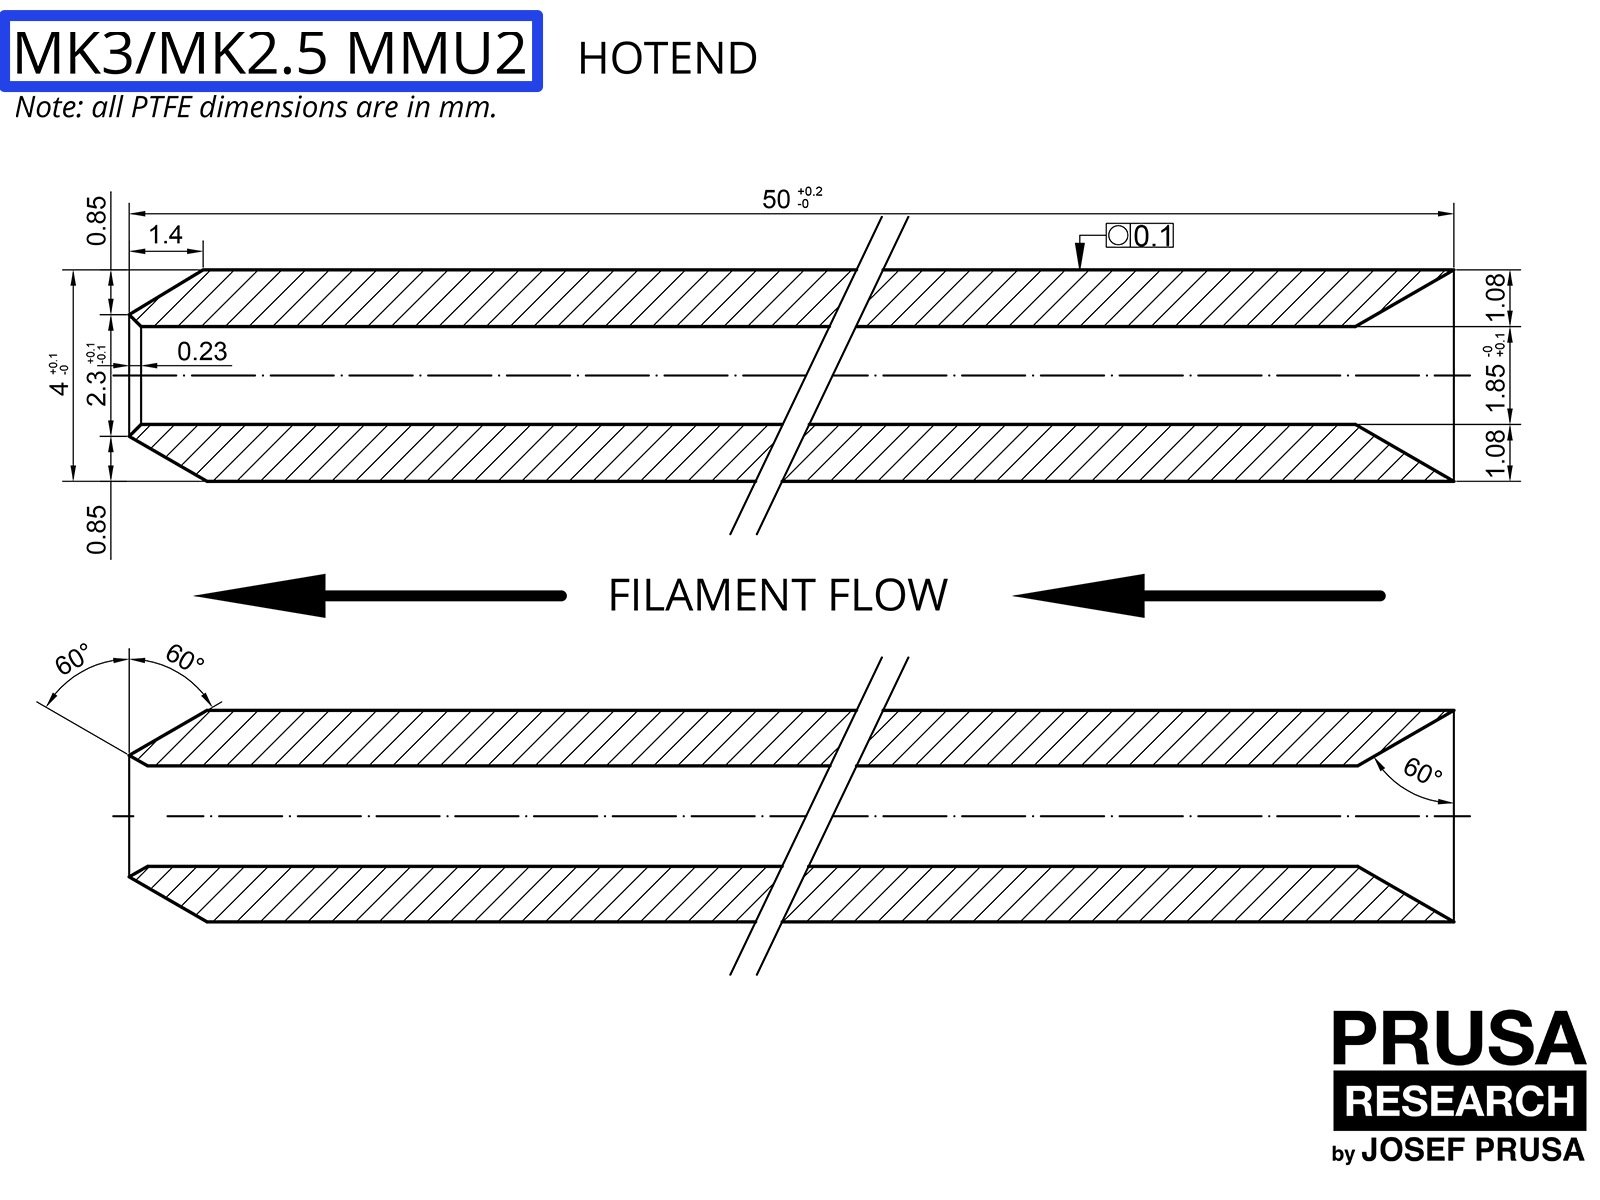 OBSOLETE: PTFE for the MK3/MK2.5 MMU2 (part 1)